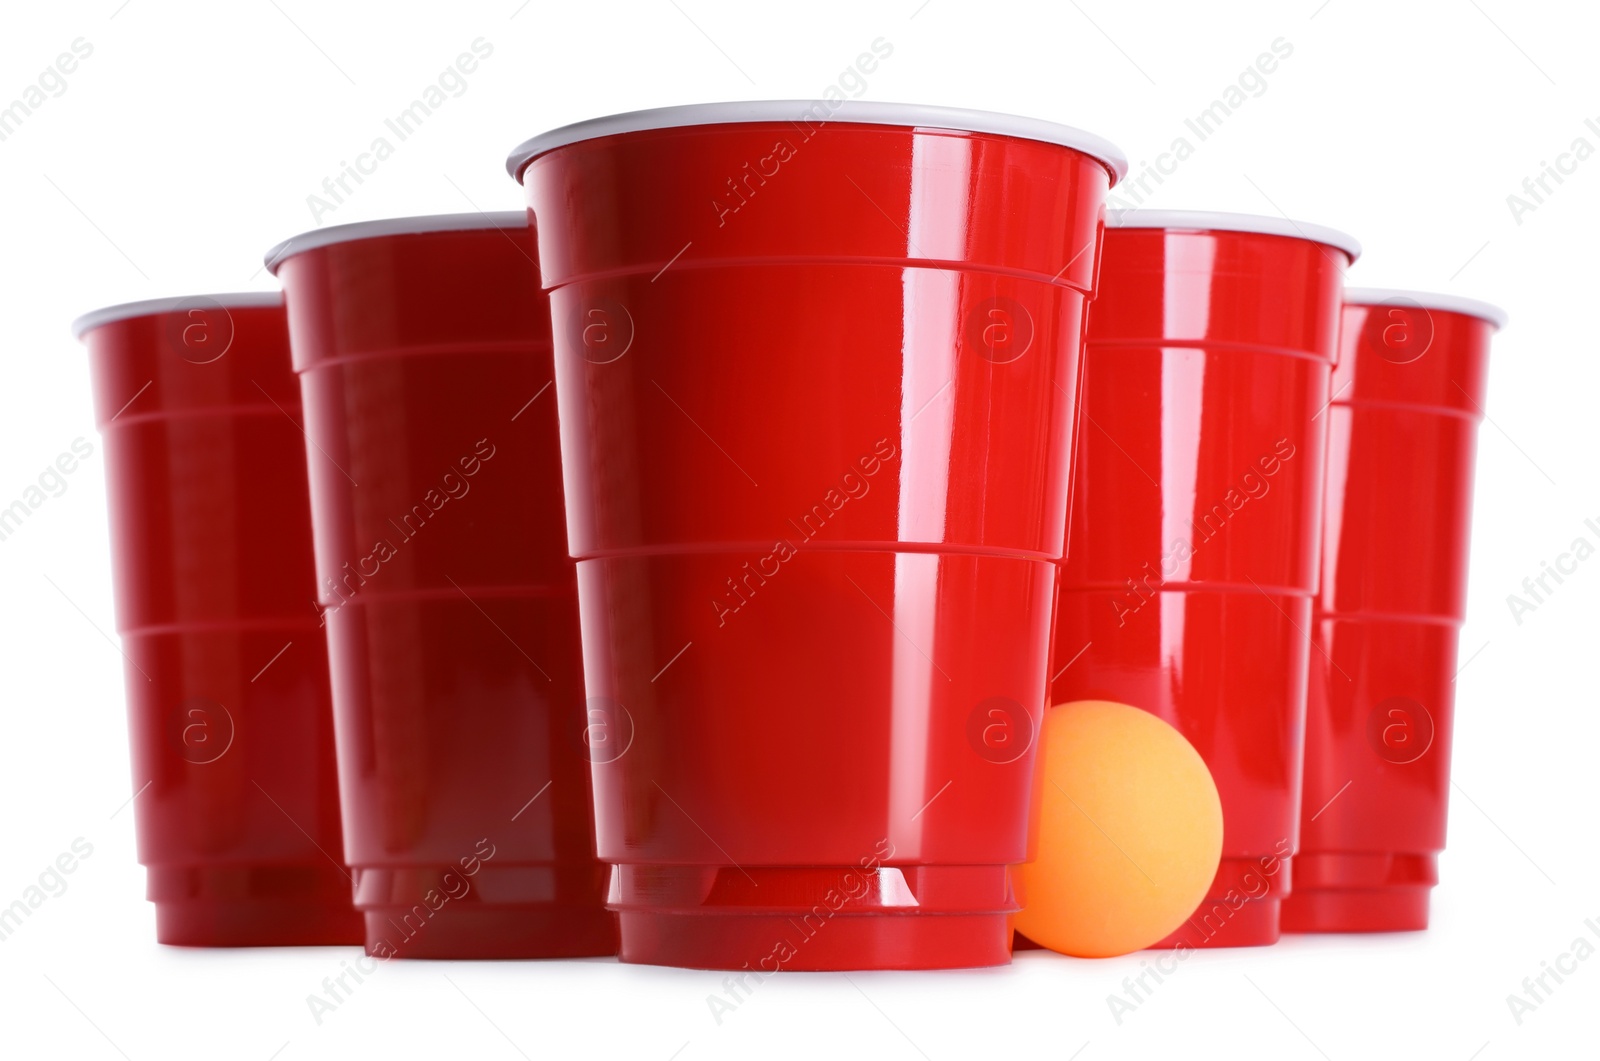 Photo of Plastic cups and ball for beer pong on white background